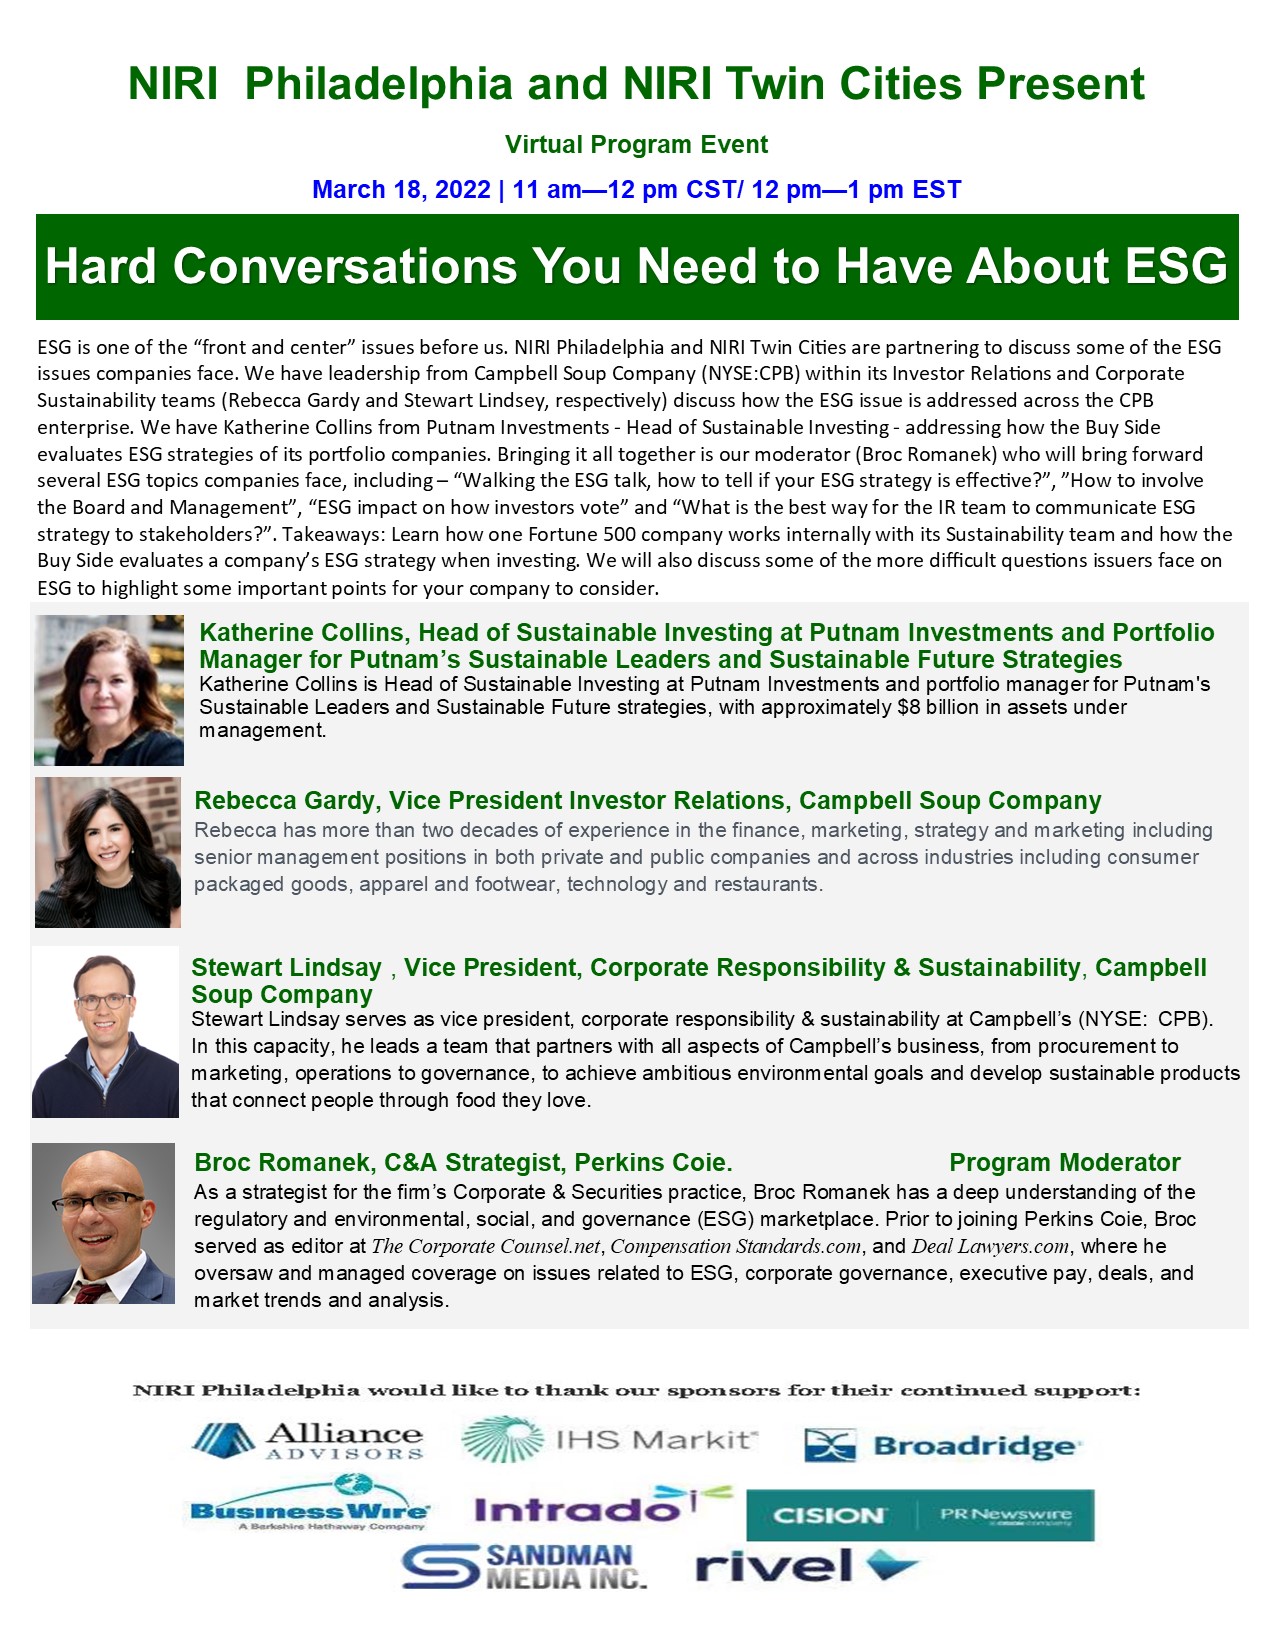 03 18 2022 Hard Conversations You Need to Have About ESG PHILA Invite